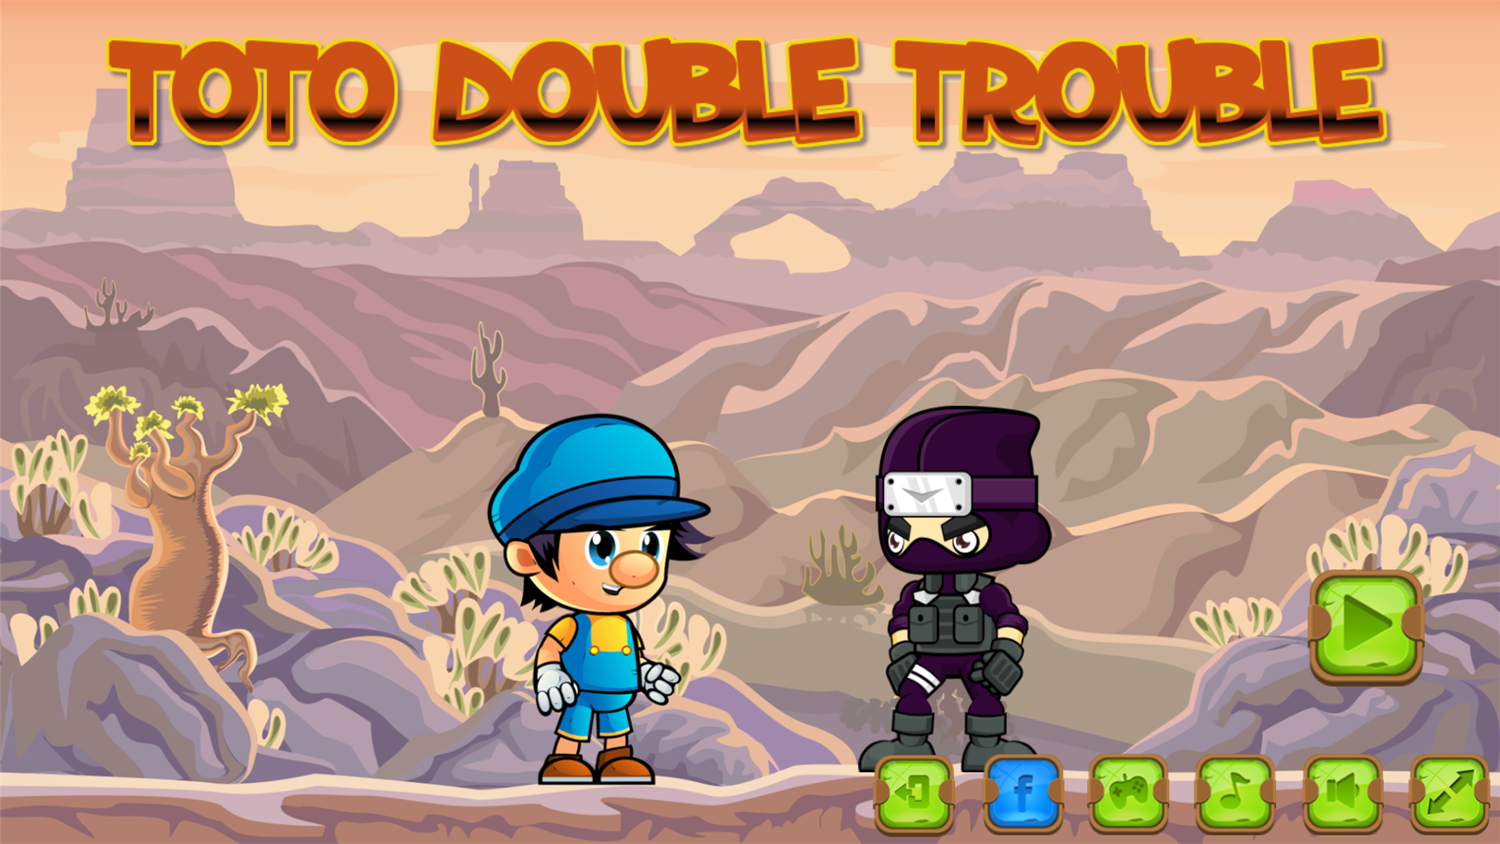 Toto Double Trouble Game Welcome Screen Screenshot.